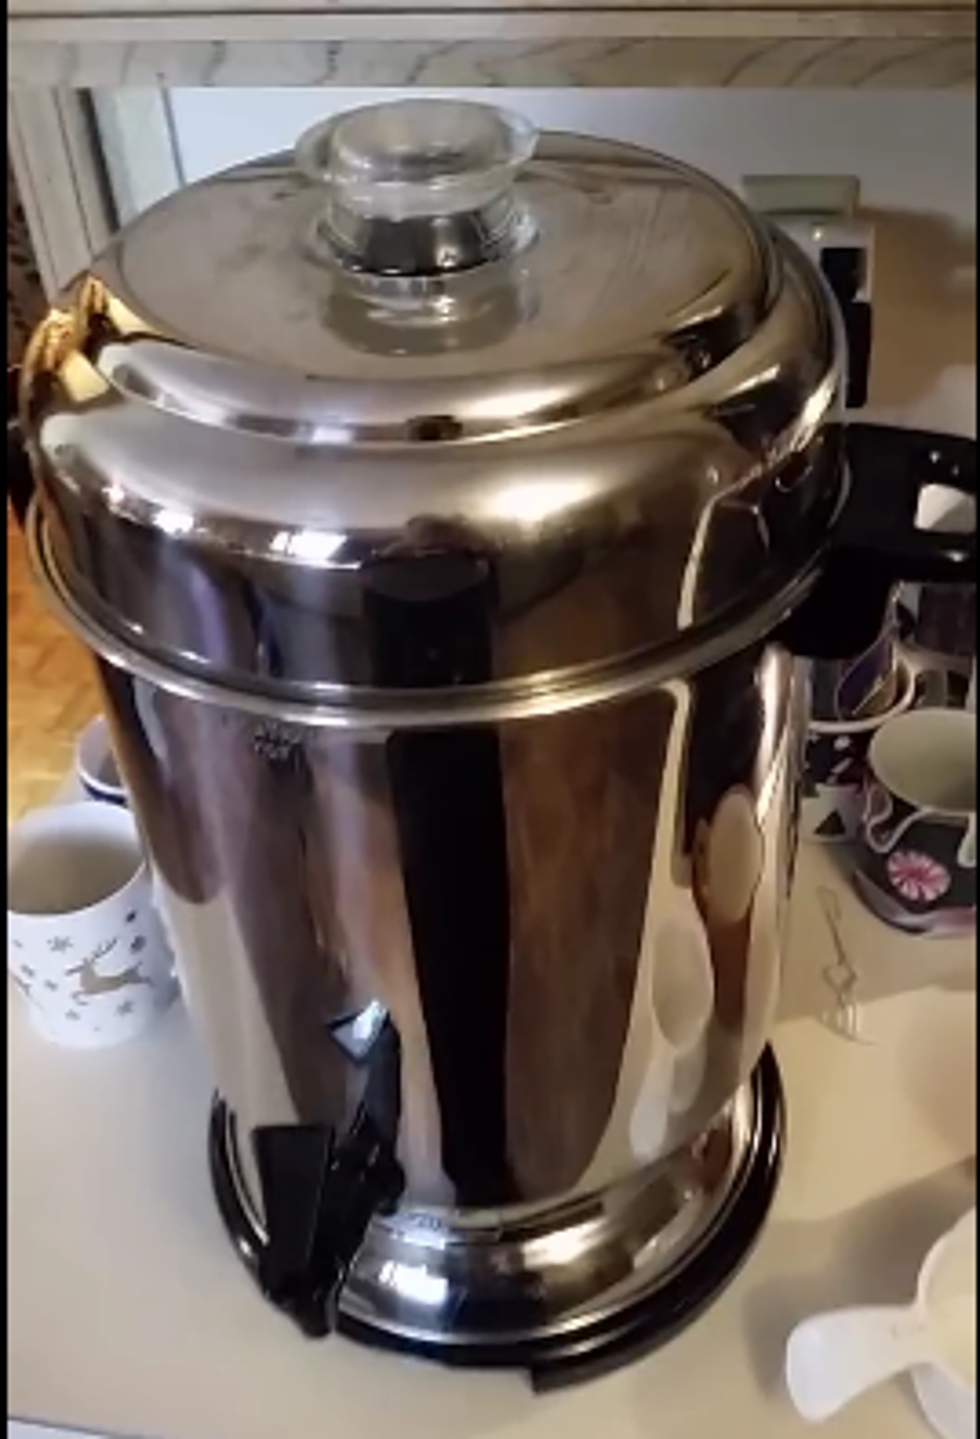 Industrial Coffee Pot Sounds Like Two Women In A Tennis Match [VIDEO]